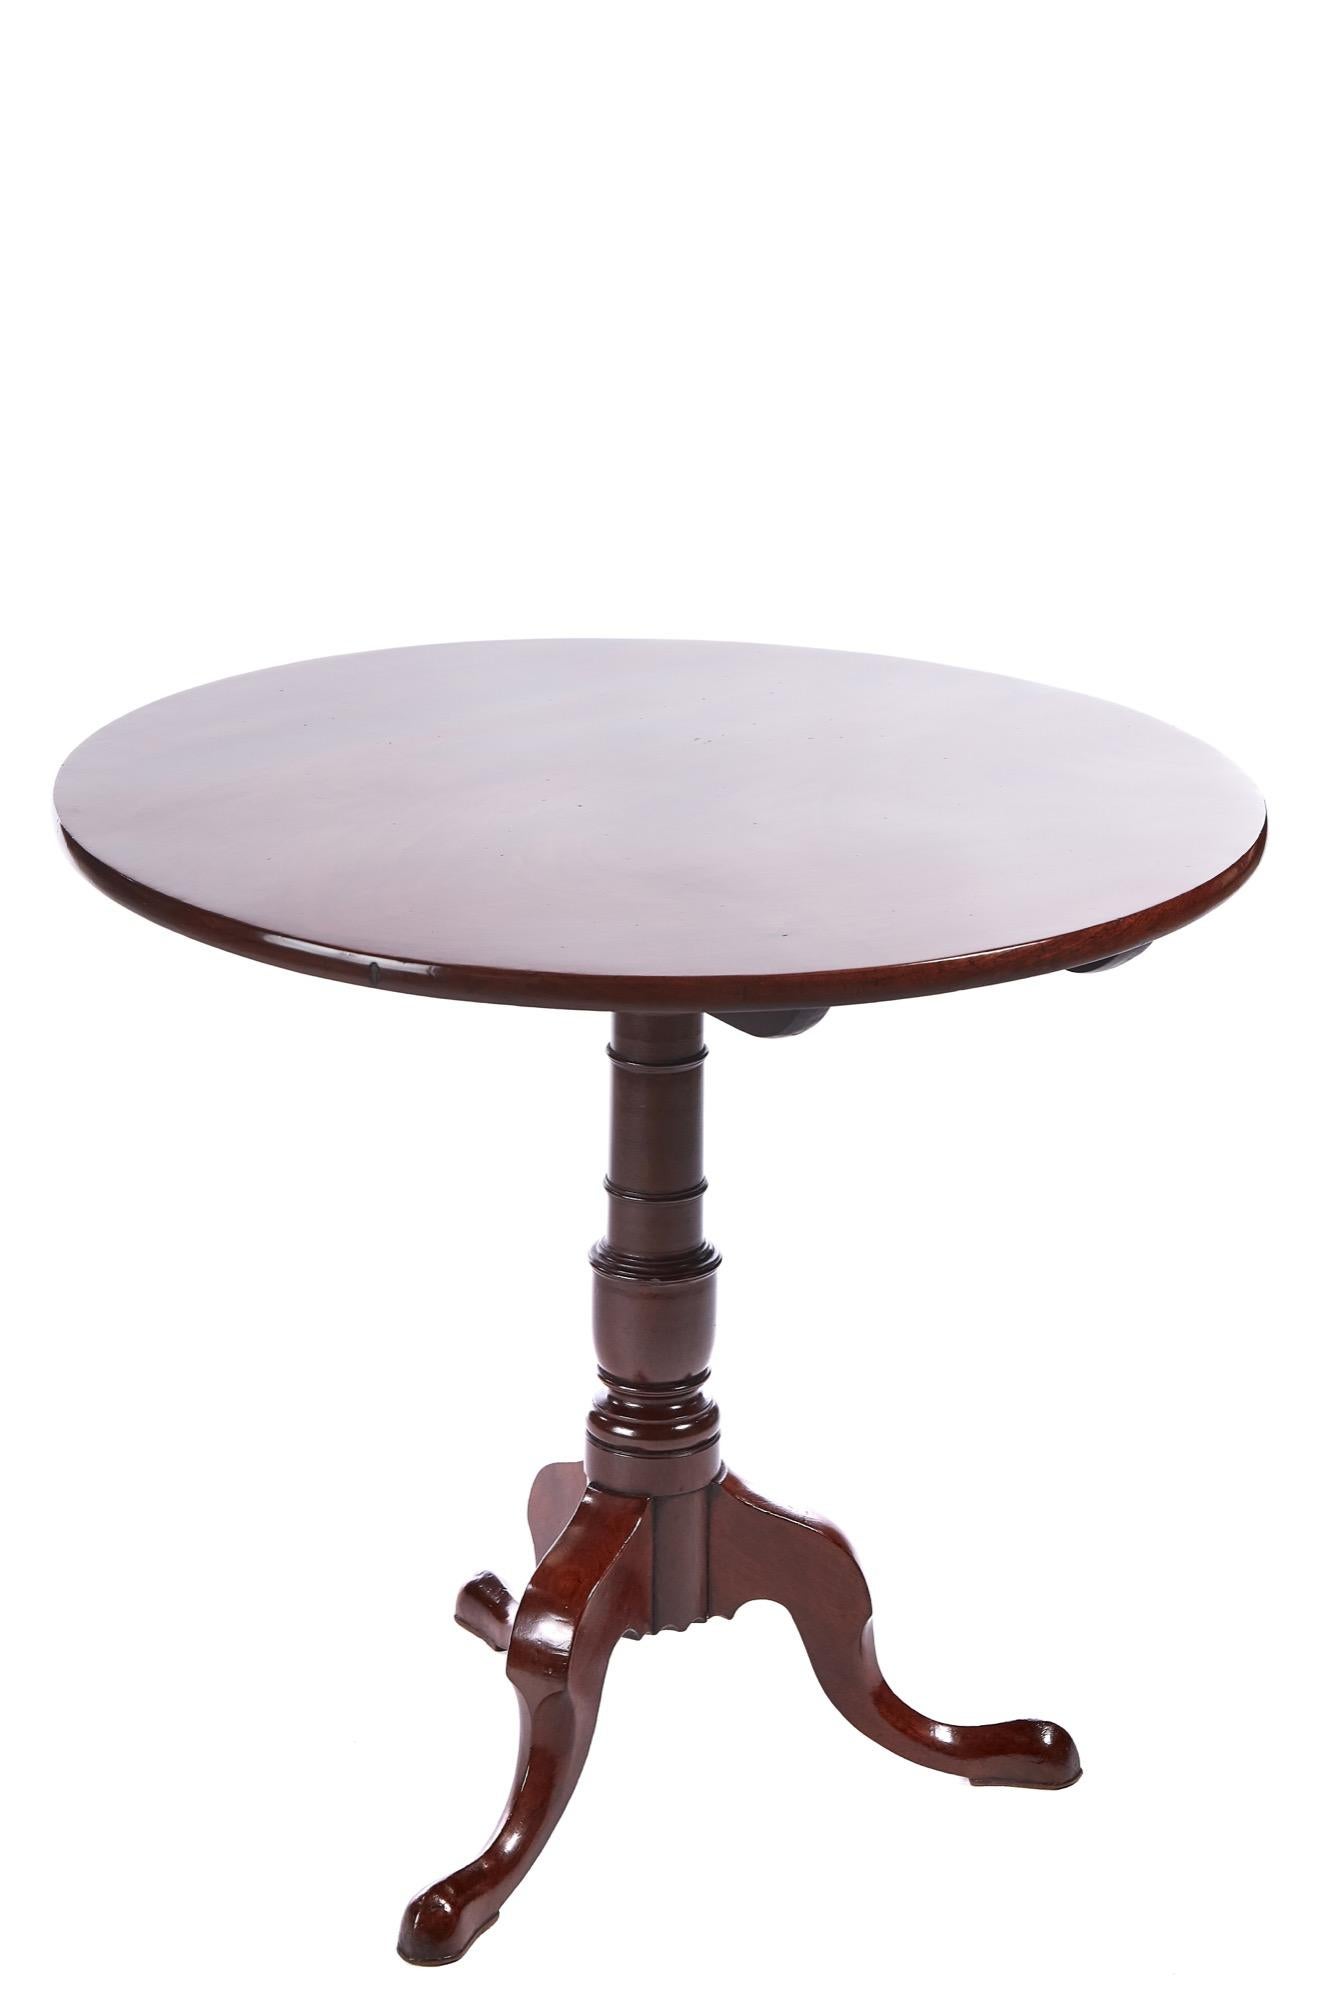 Quality Georgian mahogany round tripod table having a fantastic quality mahogany tilt top supported by a solid mahogany turned column raised on 3 shaped cabriole legs with pad feet.
Fantastic color and condition.
Measures: 30